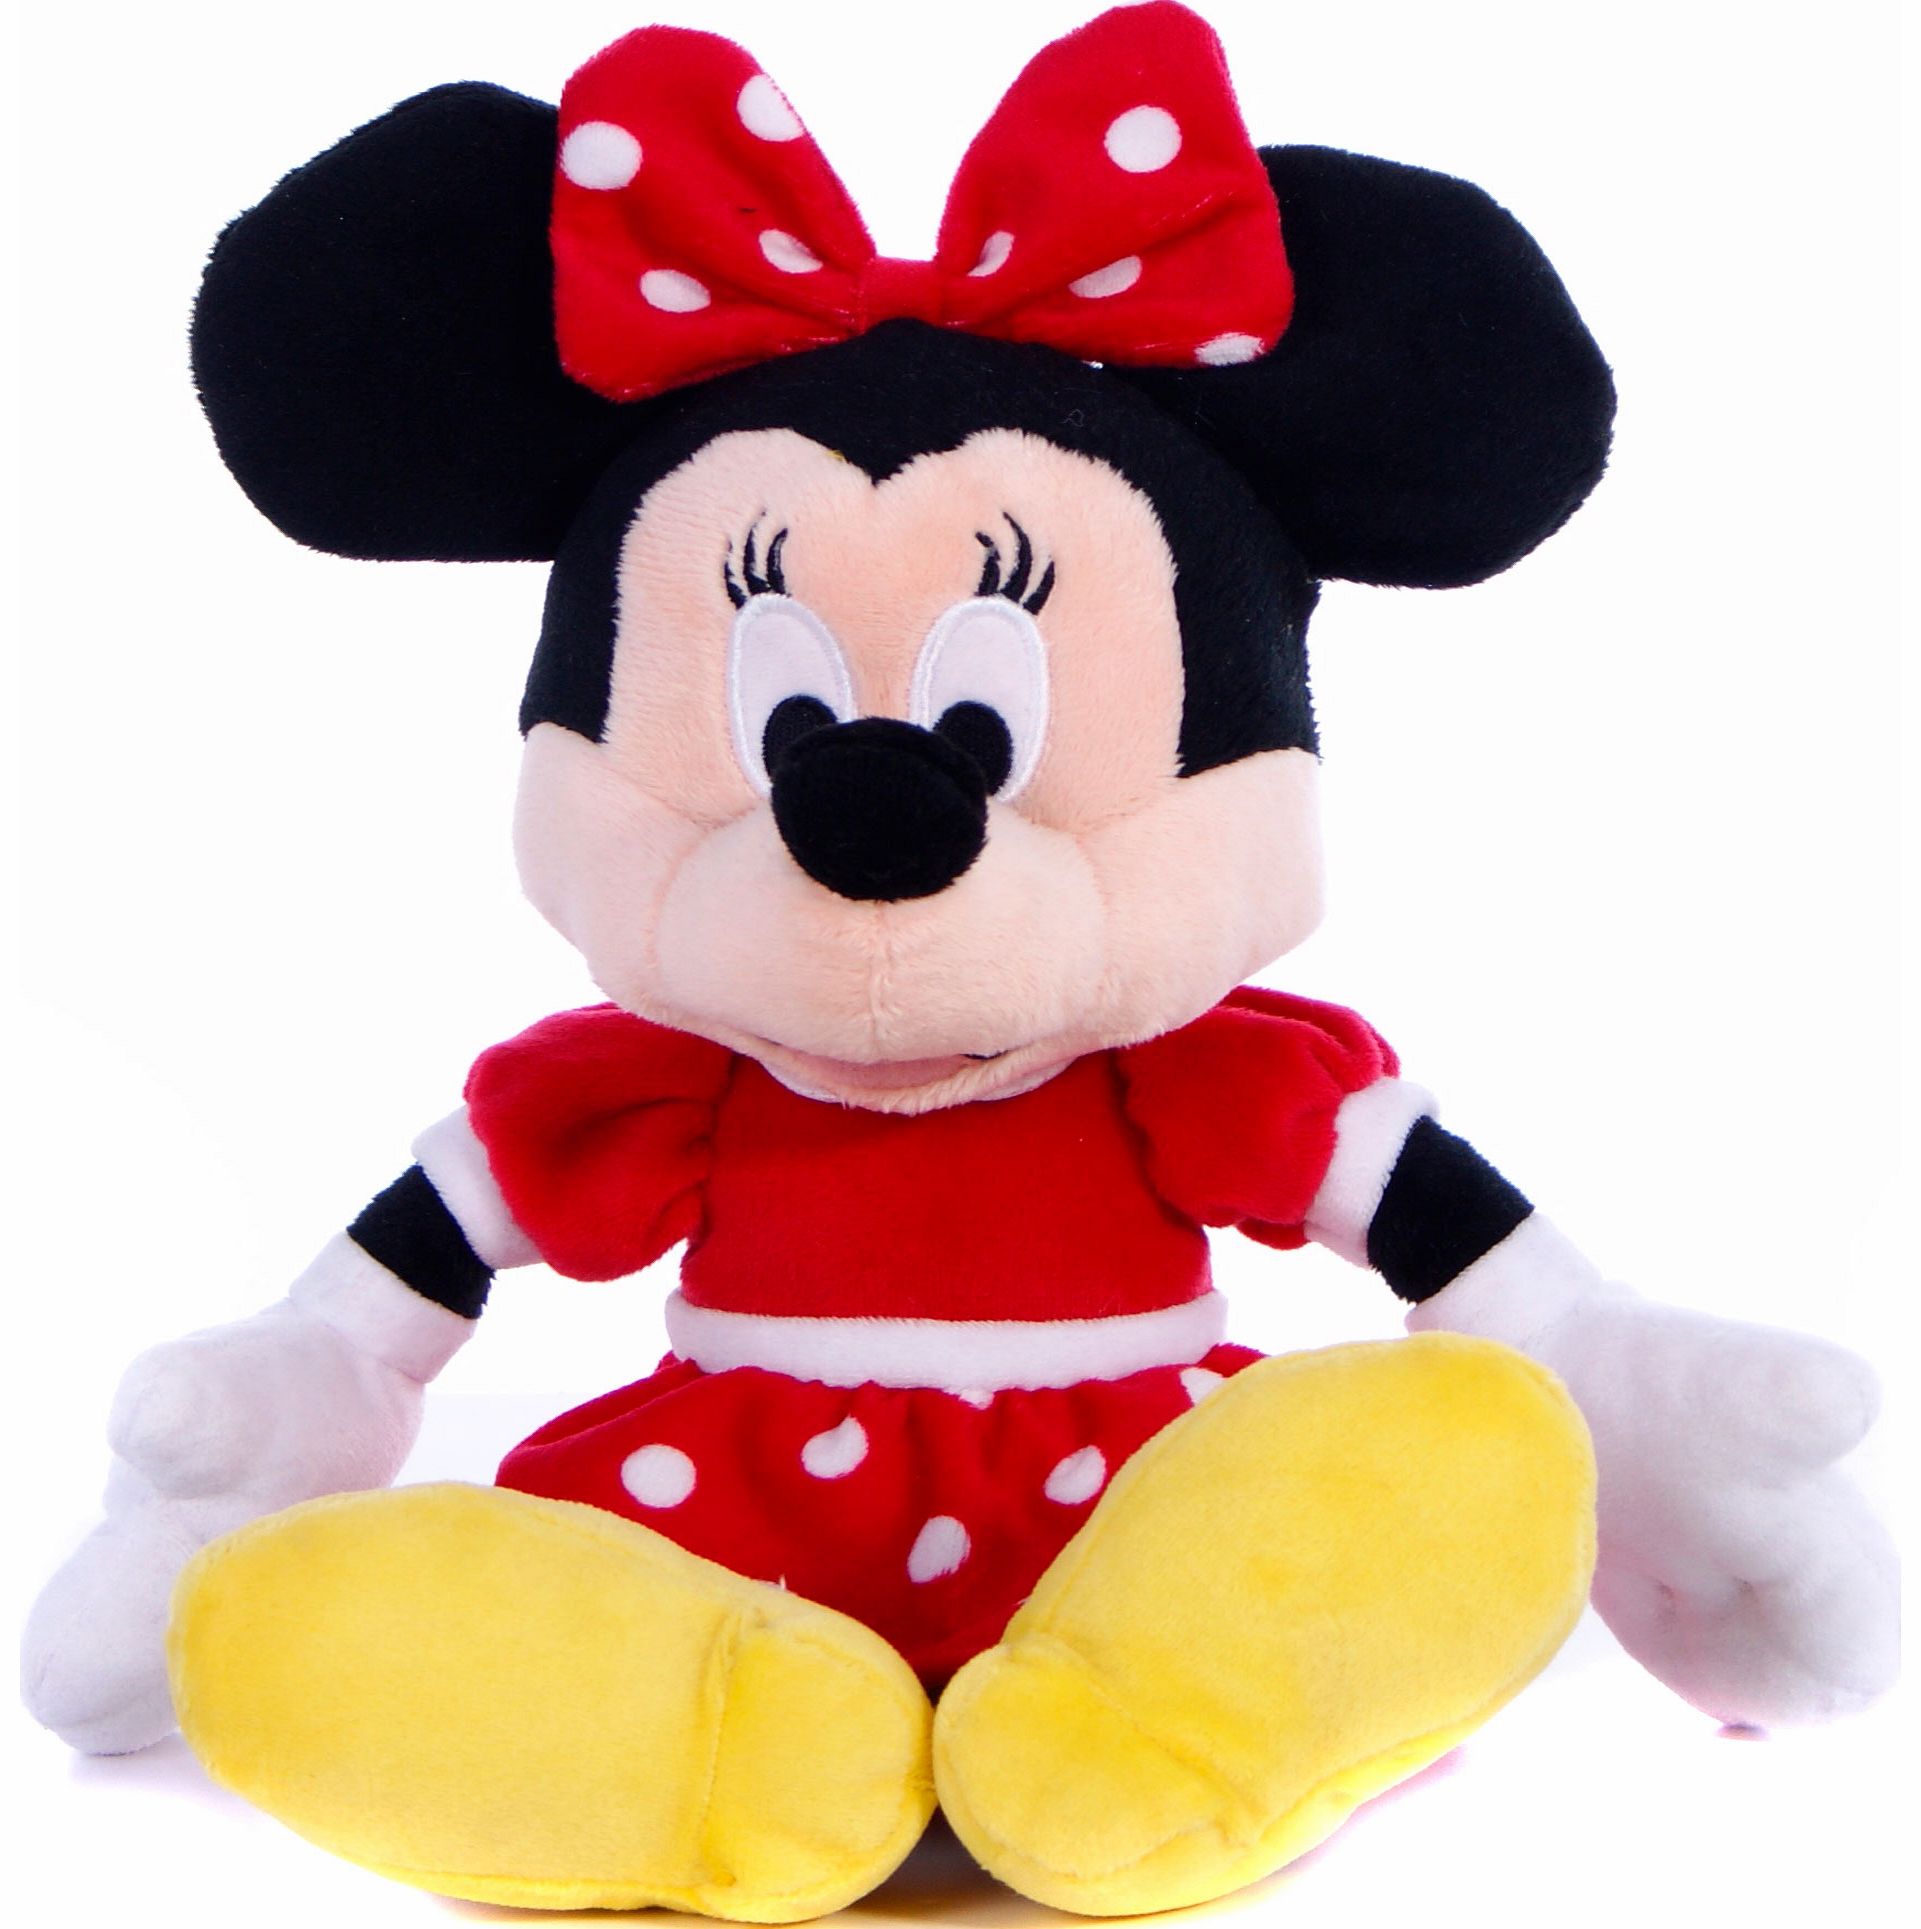 Disney Red Dress Disney Minnie Mouse 10 Soft Toy In